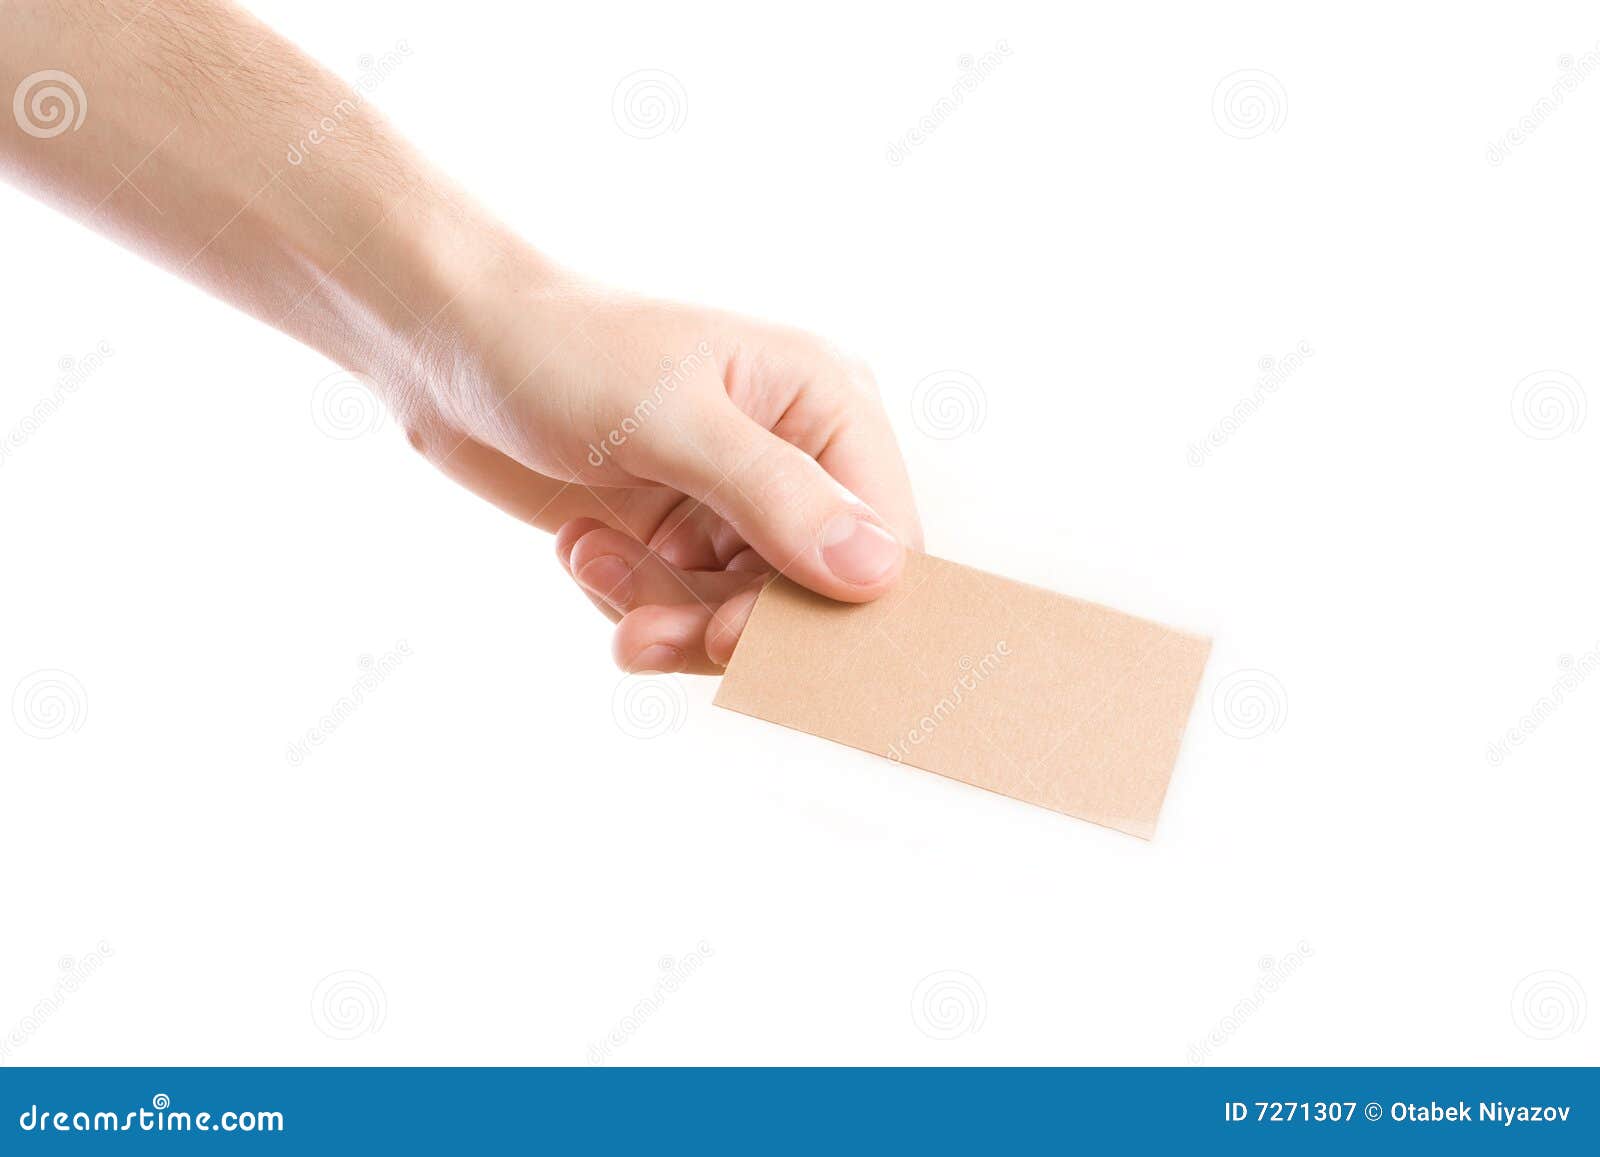 Hand Showing Blank Business Card Stock Image - Image of ...